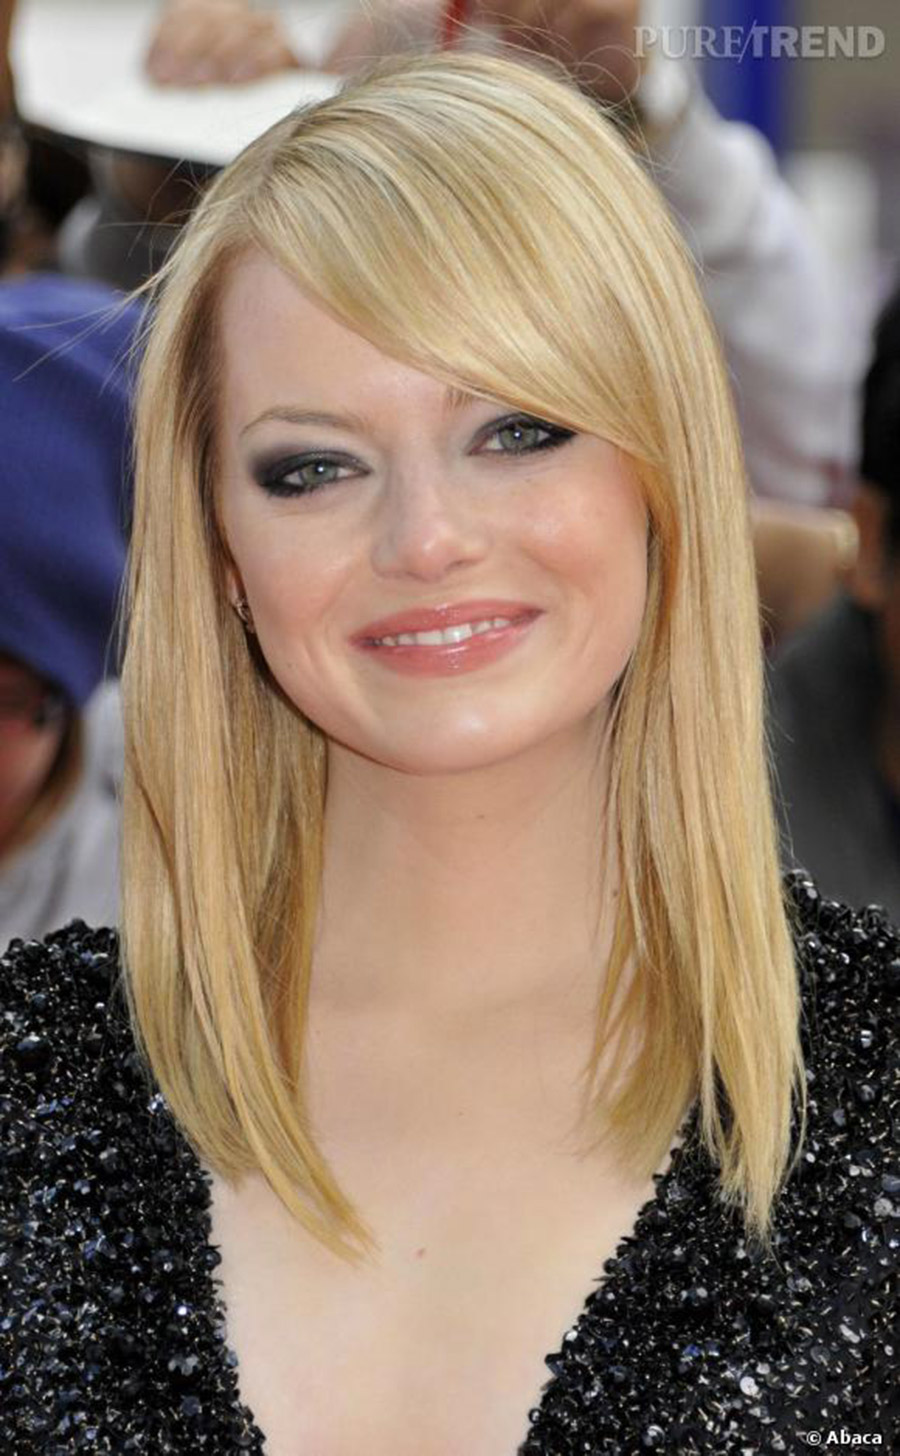 Emma-stone-the-best-famous-picture-actress-11